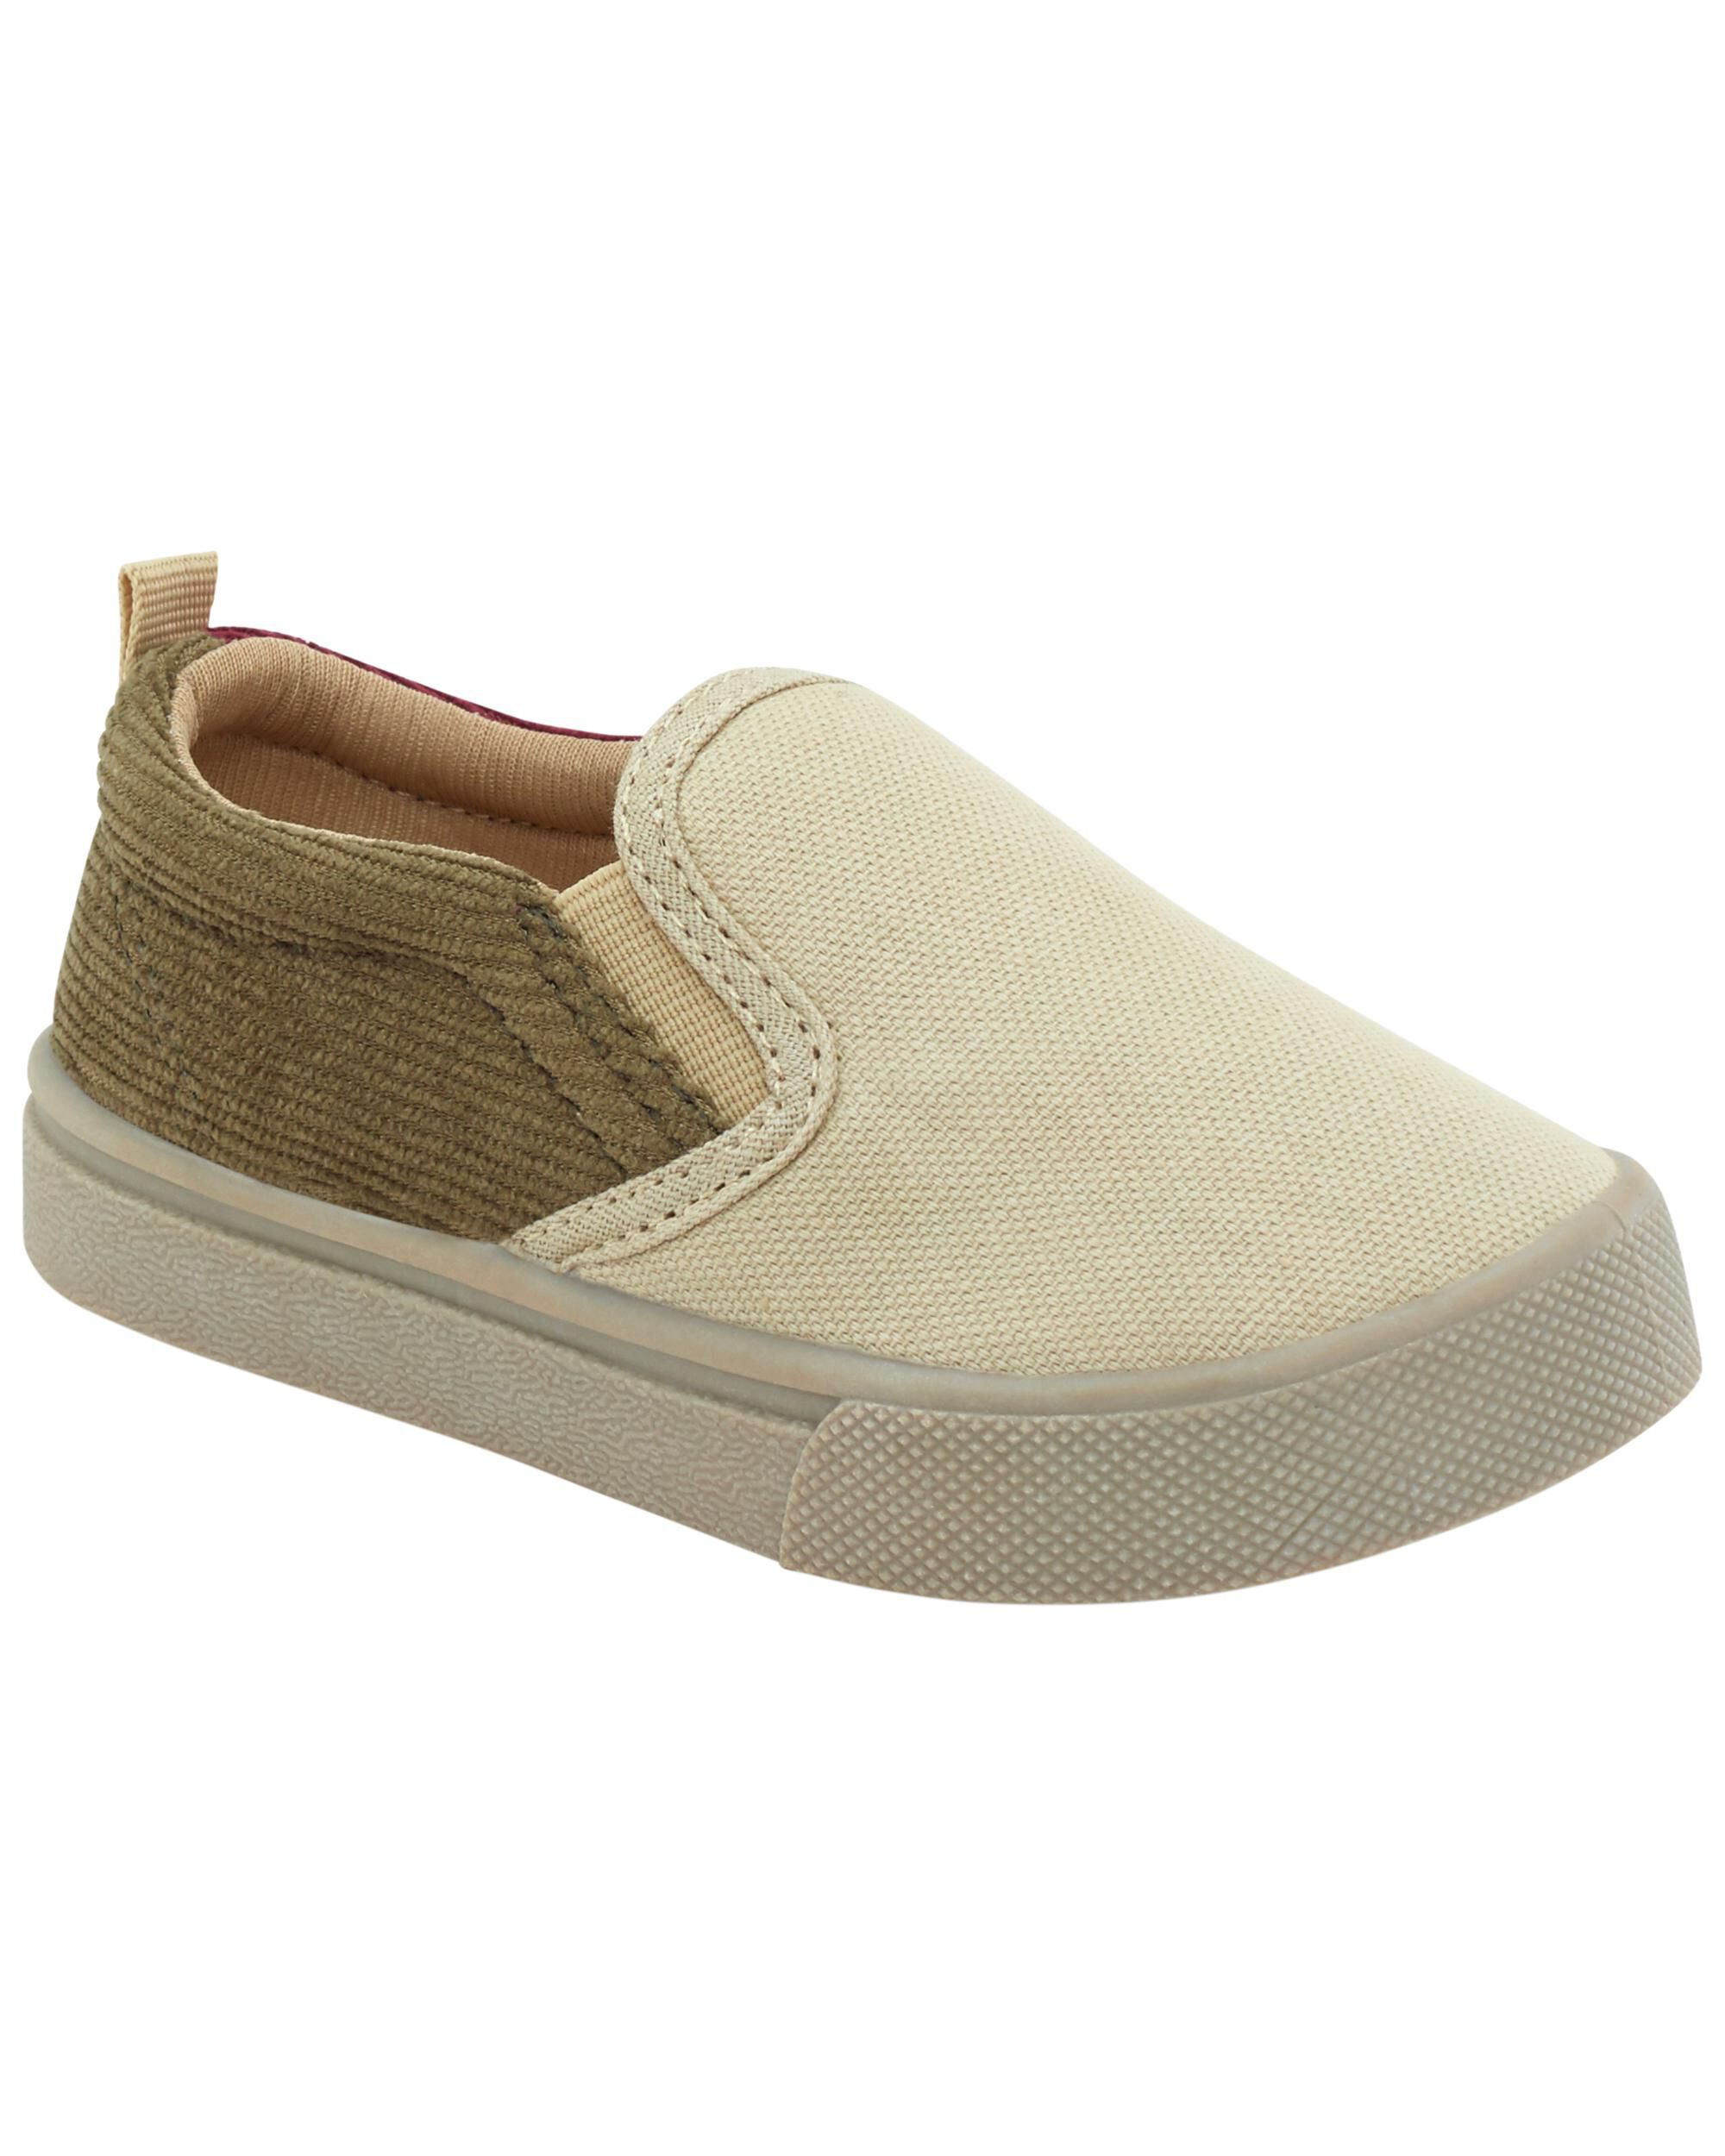 Tan Toddler Pull-On Casual Shoes | Carter's Oshkosh Canada